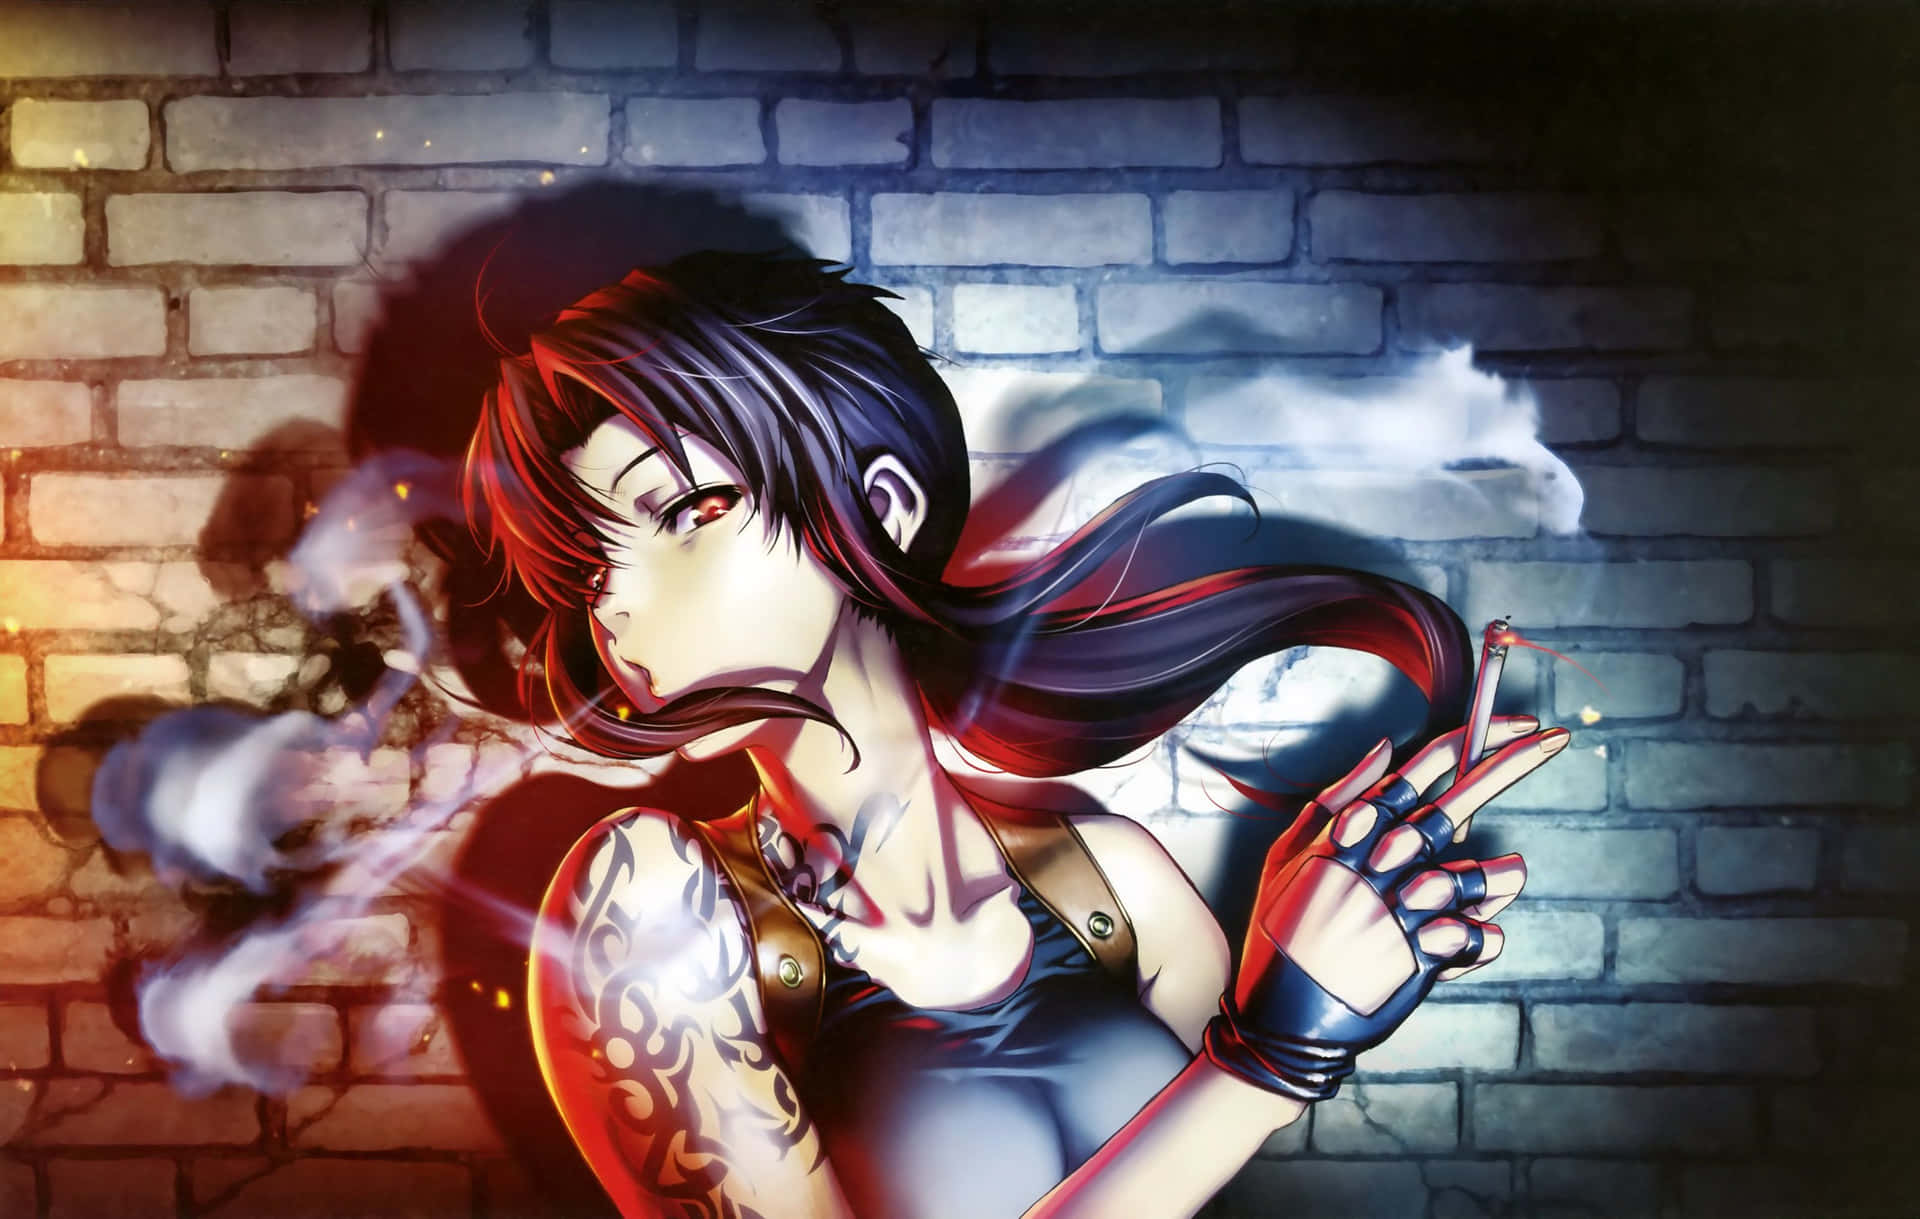 Badass Anime Revy With Cigarette Background